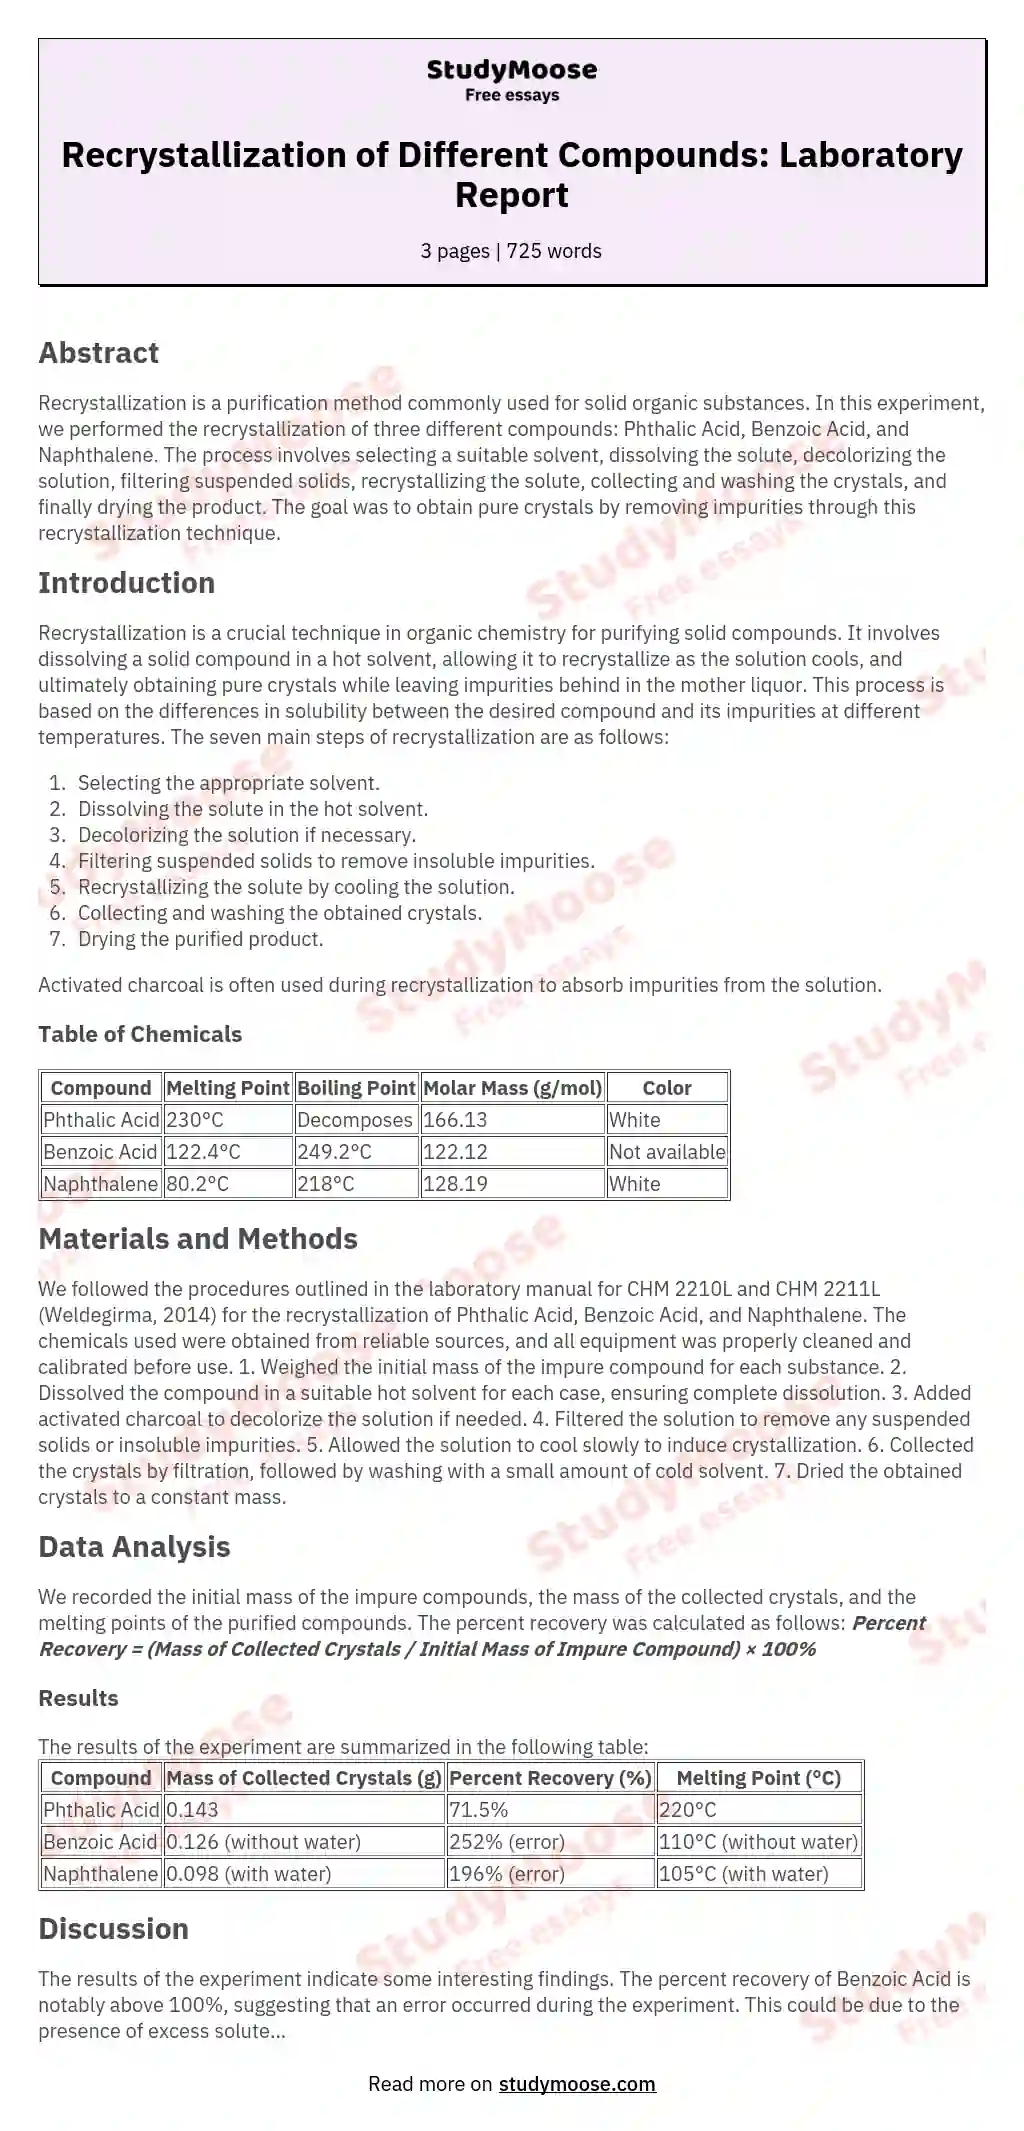 Recrystallization of Different Compounds: Laboratory Report essay